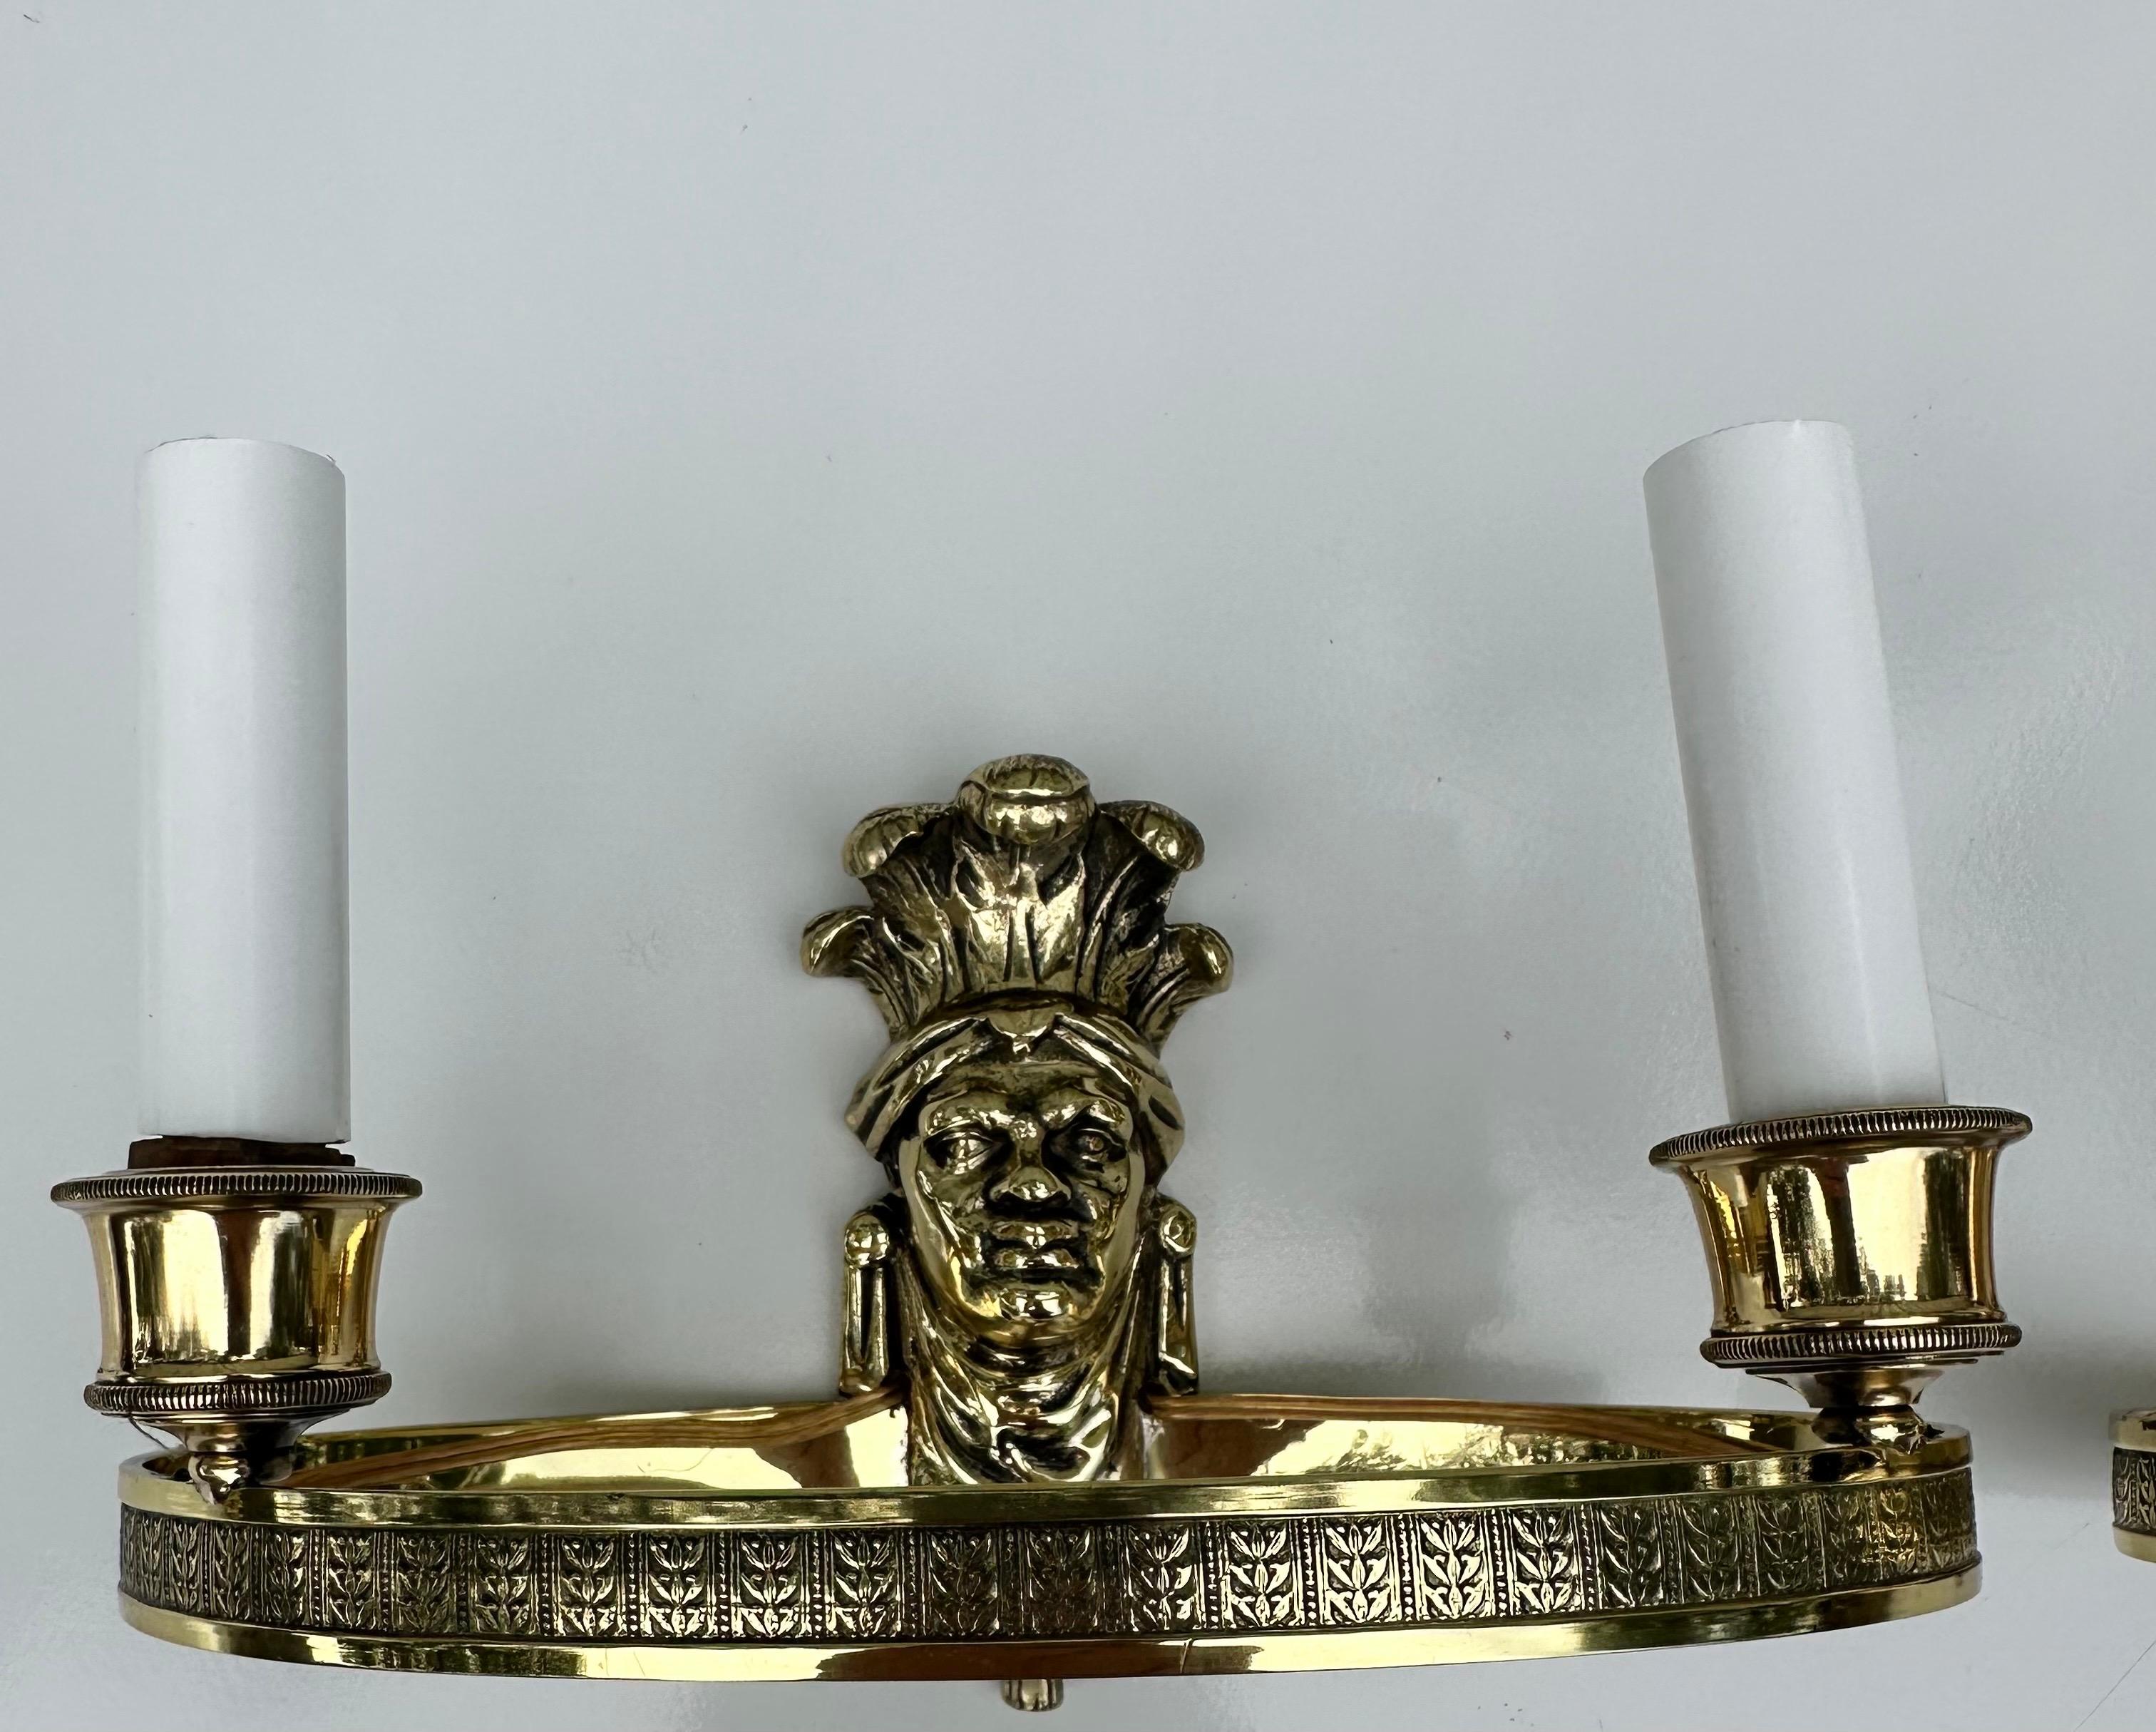 Pair of high quality bronze French sconces by maison Bagues.
US rewired and in working condition.
2 lights , 60 watts max bulb.
2 pairs available.